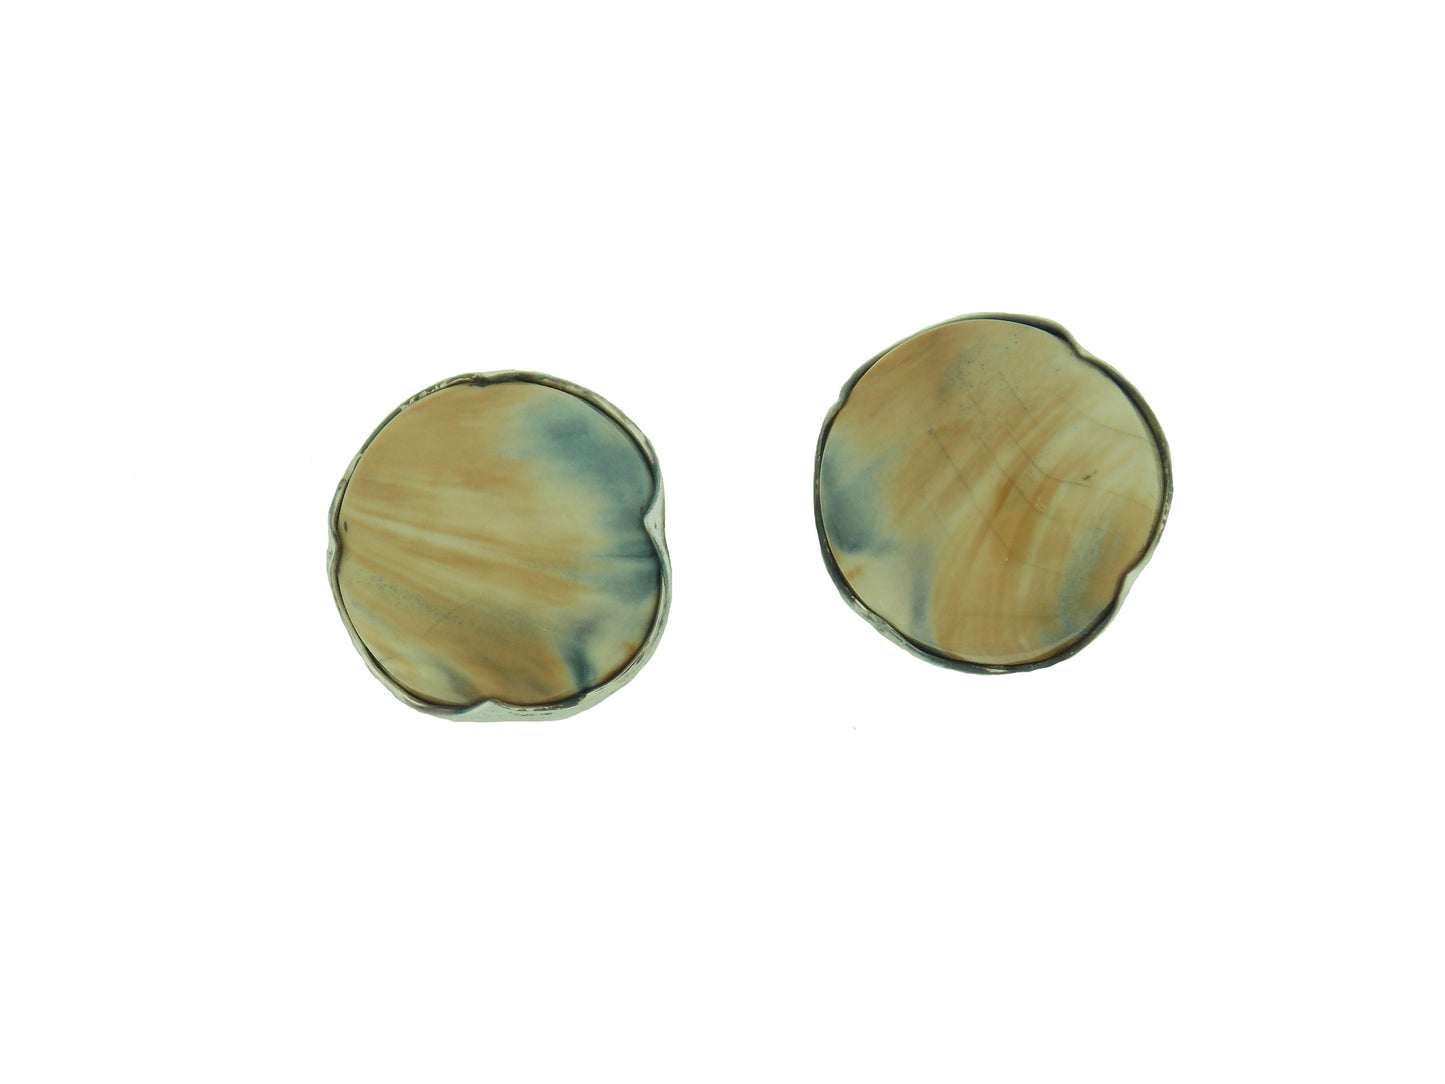 Fossilized Woolly Mammoth Rust and Blue Cream Earrings